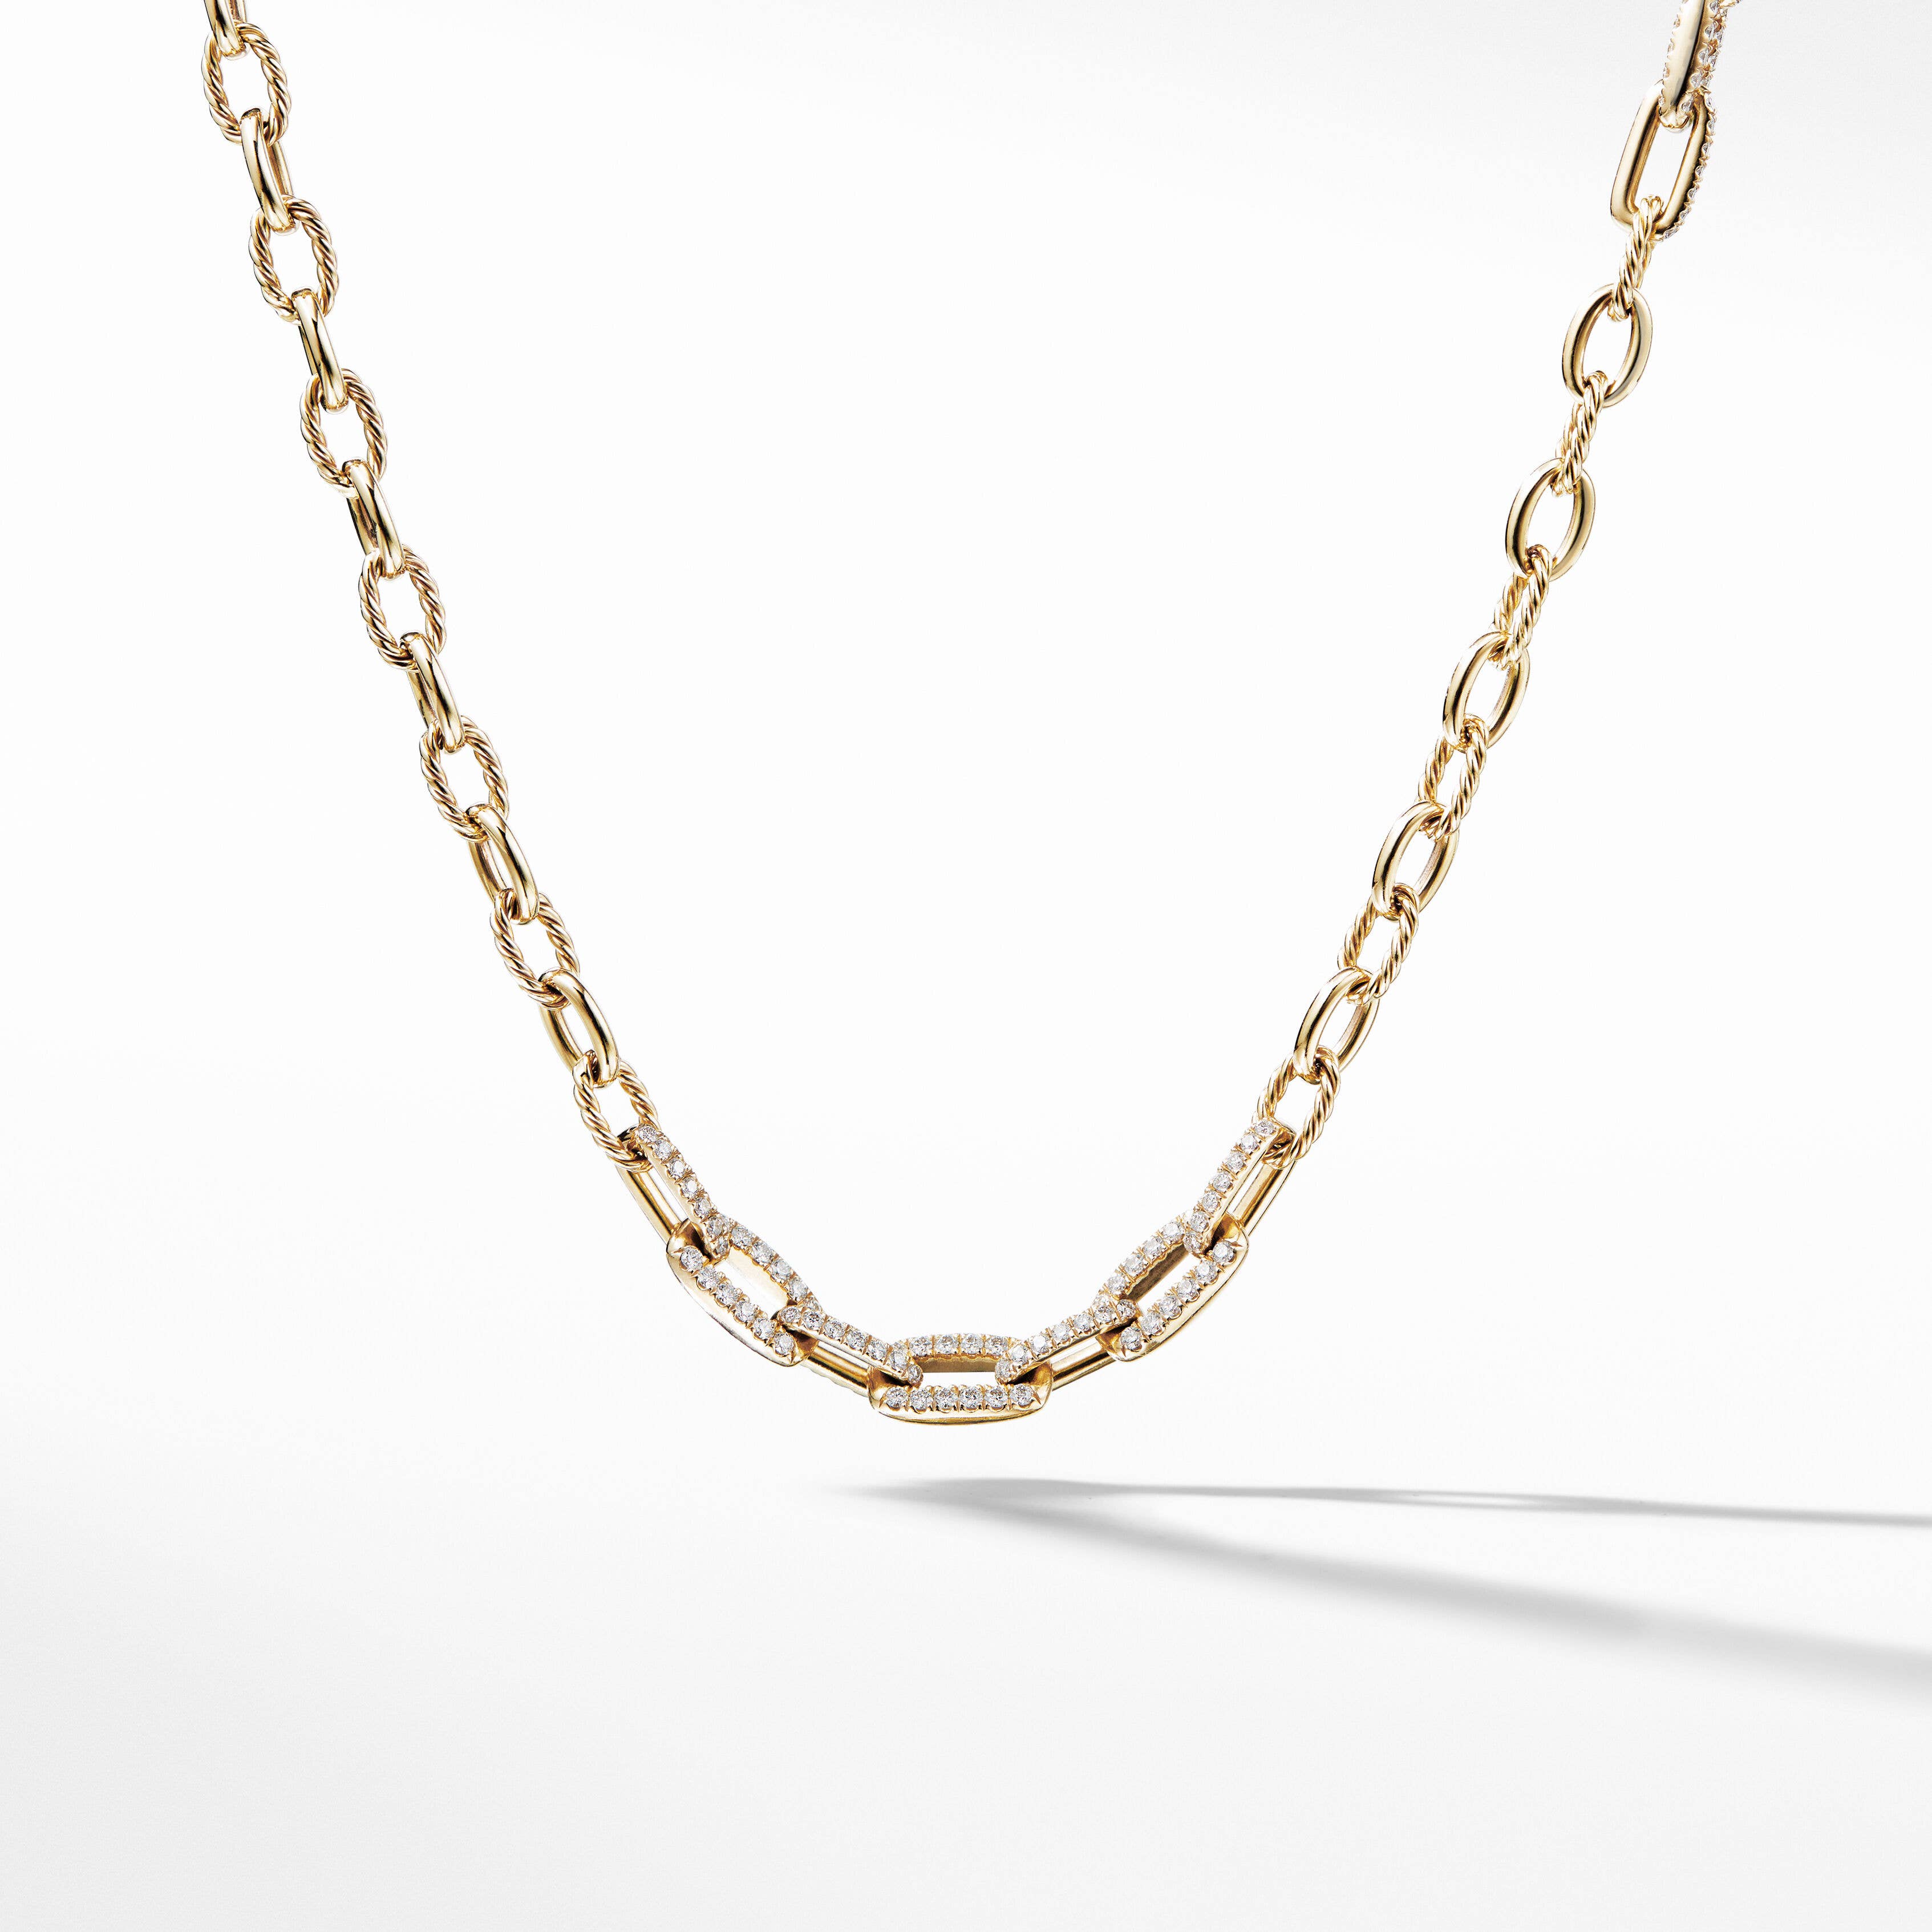 Stax Convertible Chain Necklace in 18K Yellow Gold with Pavé Diamonds